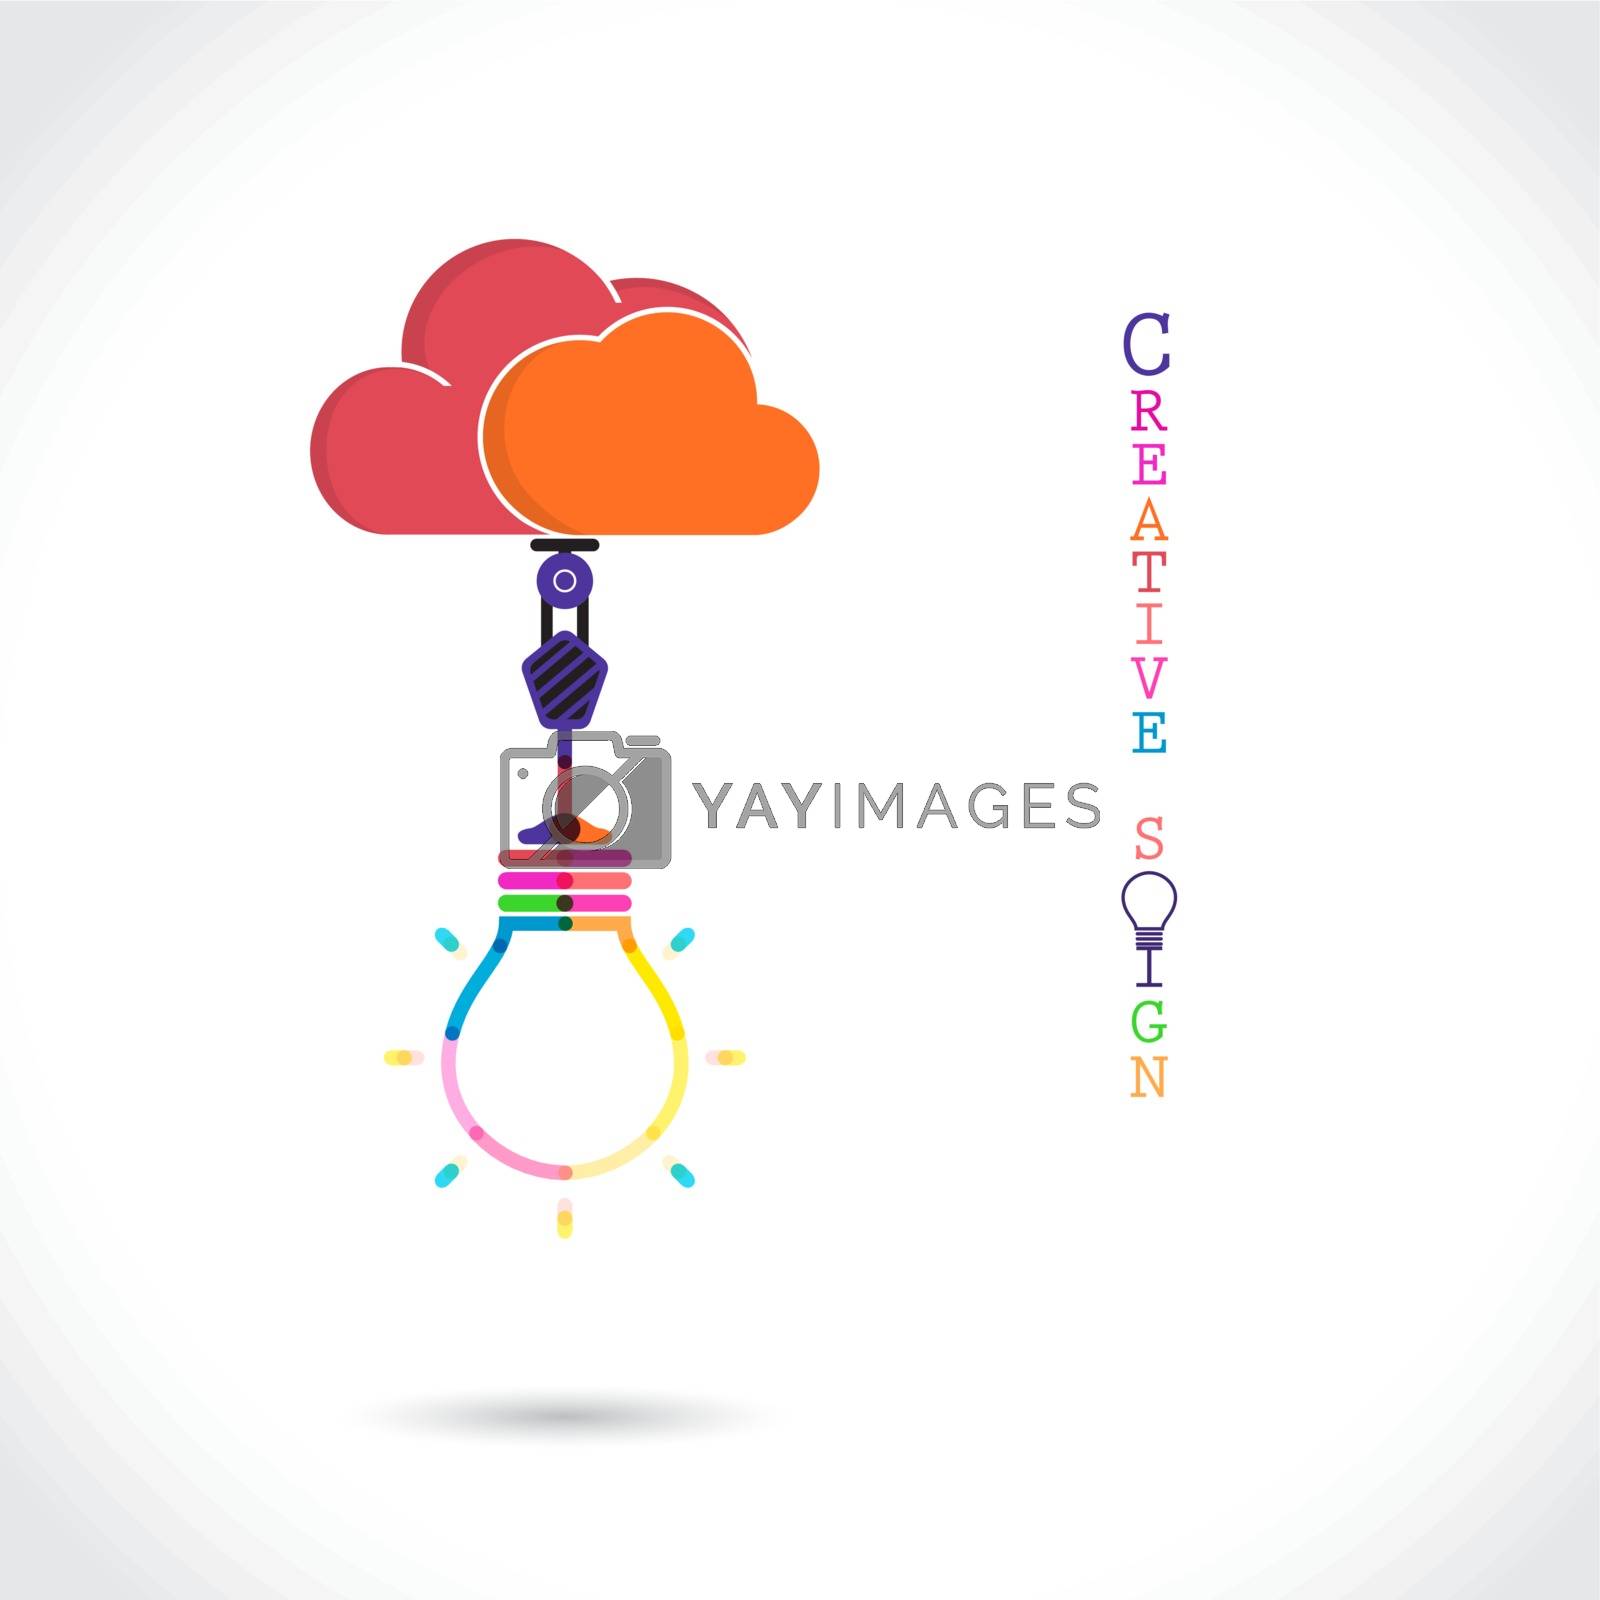 Royalty free image of Flat cloud and creative light bulb sign by chatchai5172